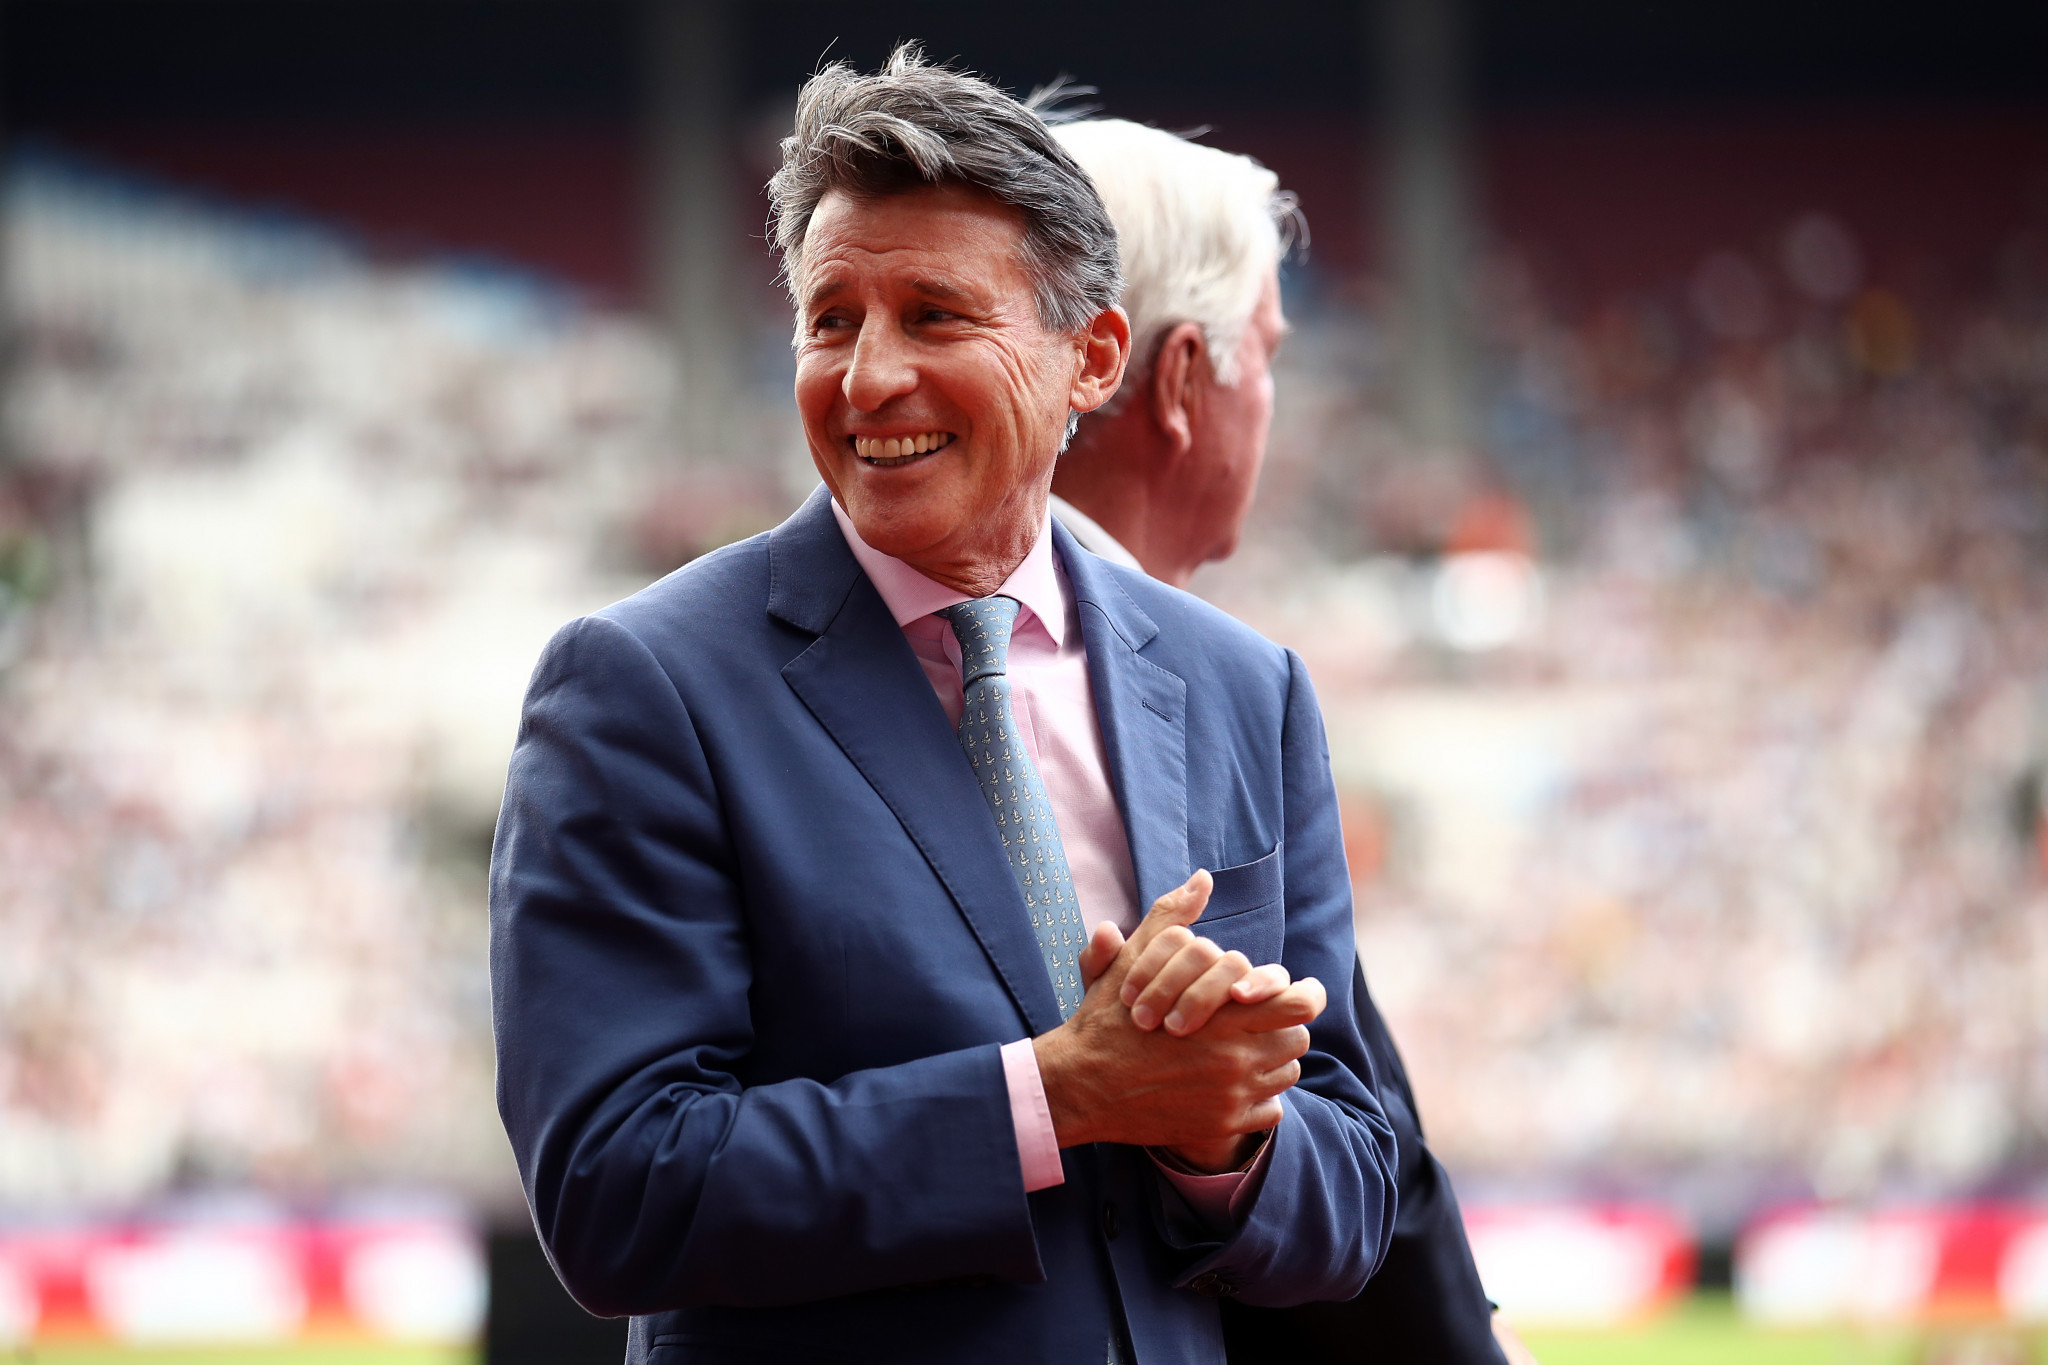 Sebastian Coe is to be re-elected as President of the IAAF unopposed, it has been officially confirmed ©Getty Images